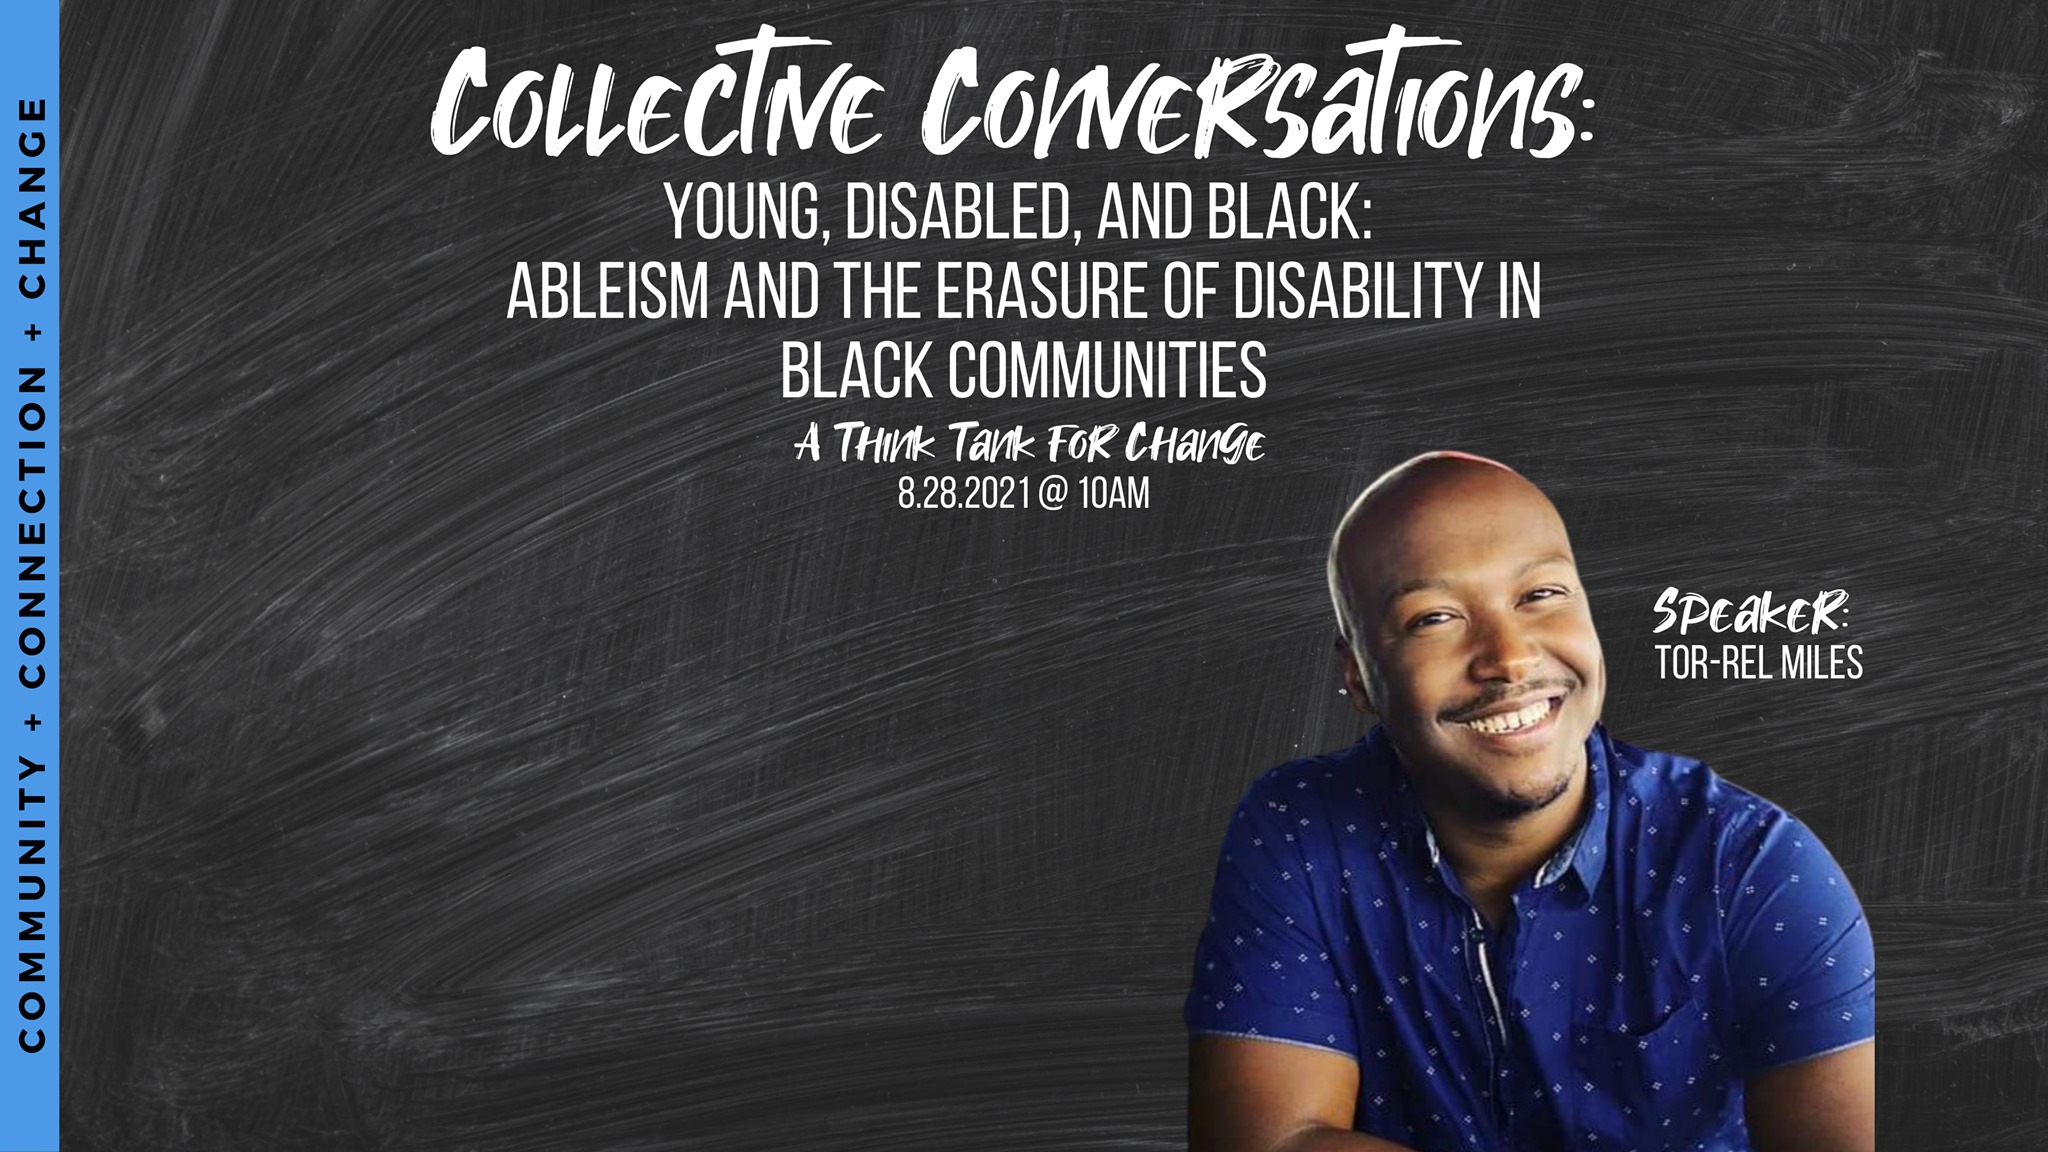 image for Young, Disabled, and Black: Ableism and the Erasure of Disability in Black Communities